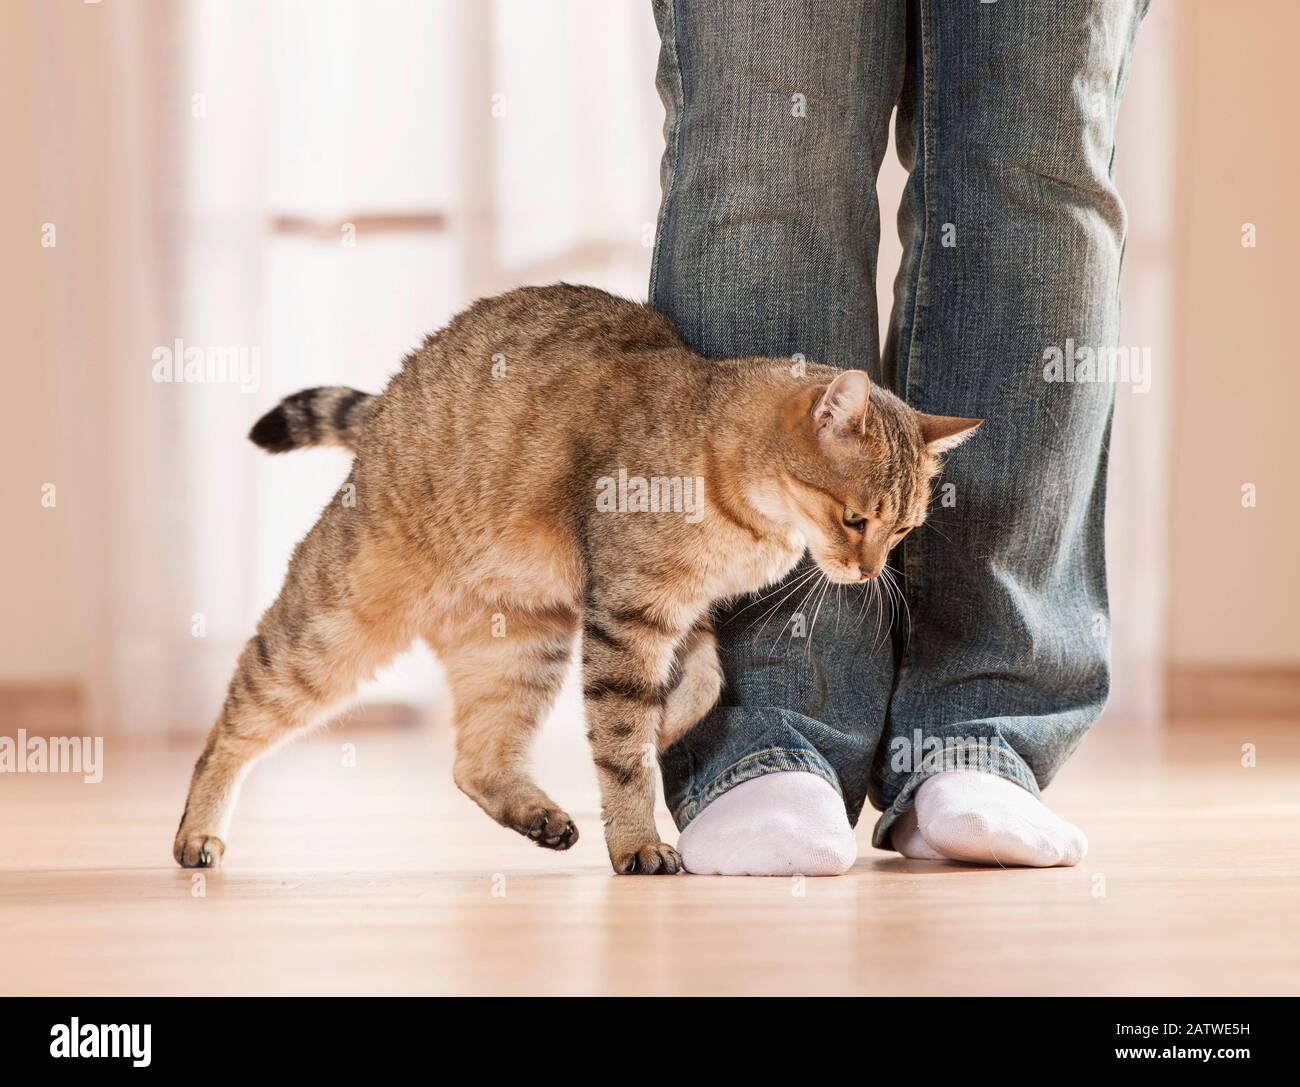 Domestic cat. Adult cat demonstrating its affection for a person by rubbing its forehead against its legs. Germany Stock Photo